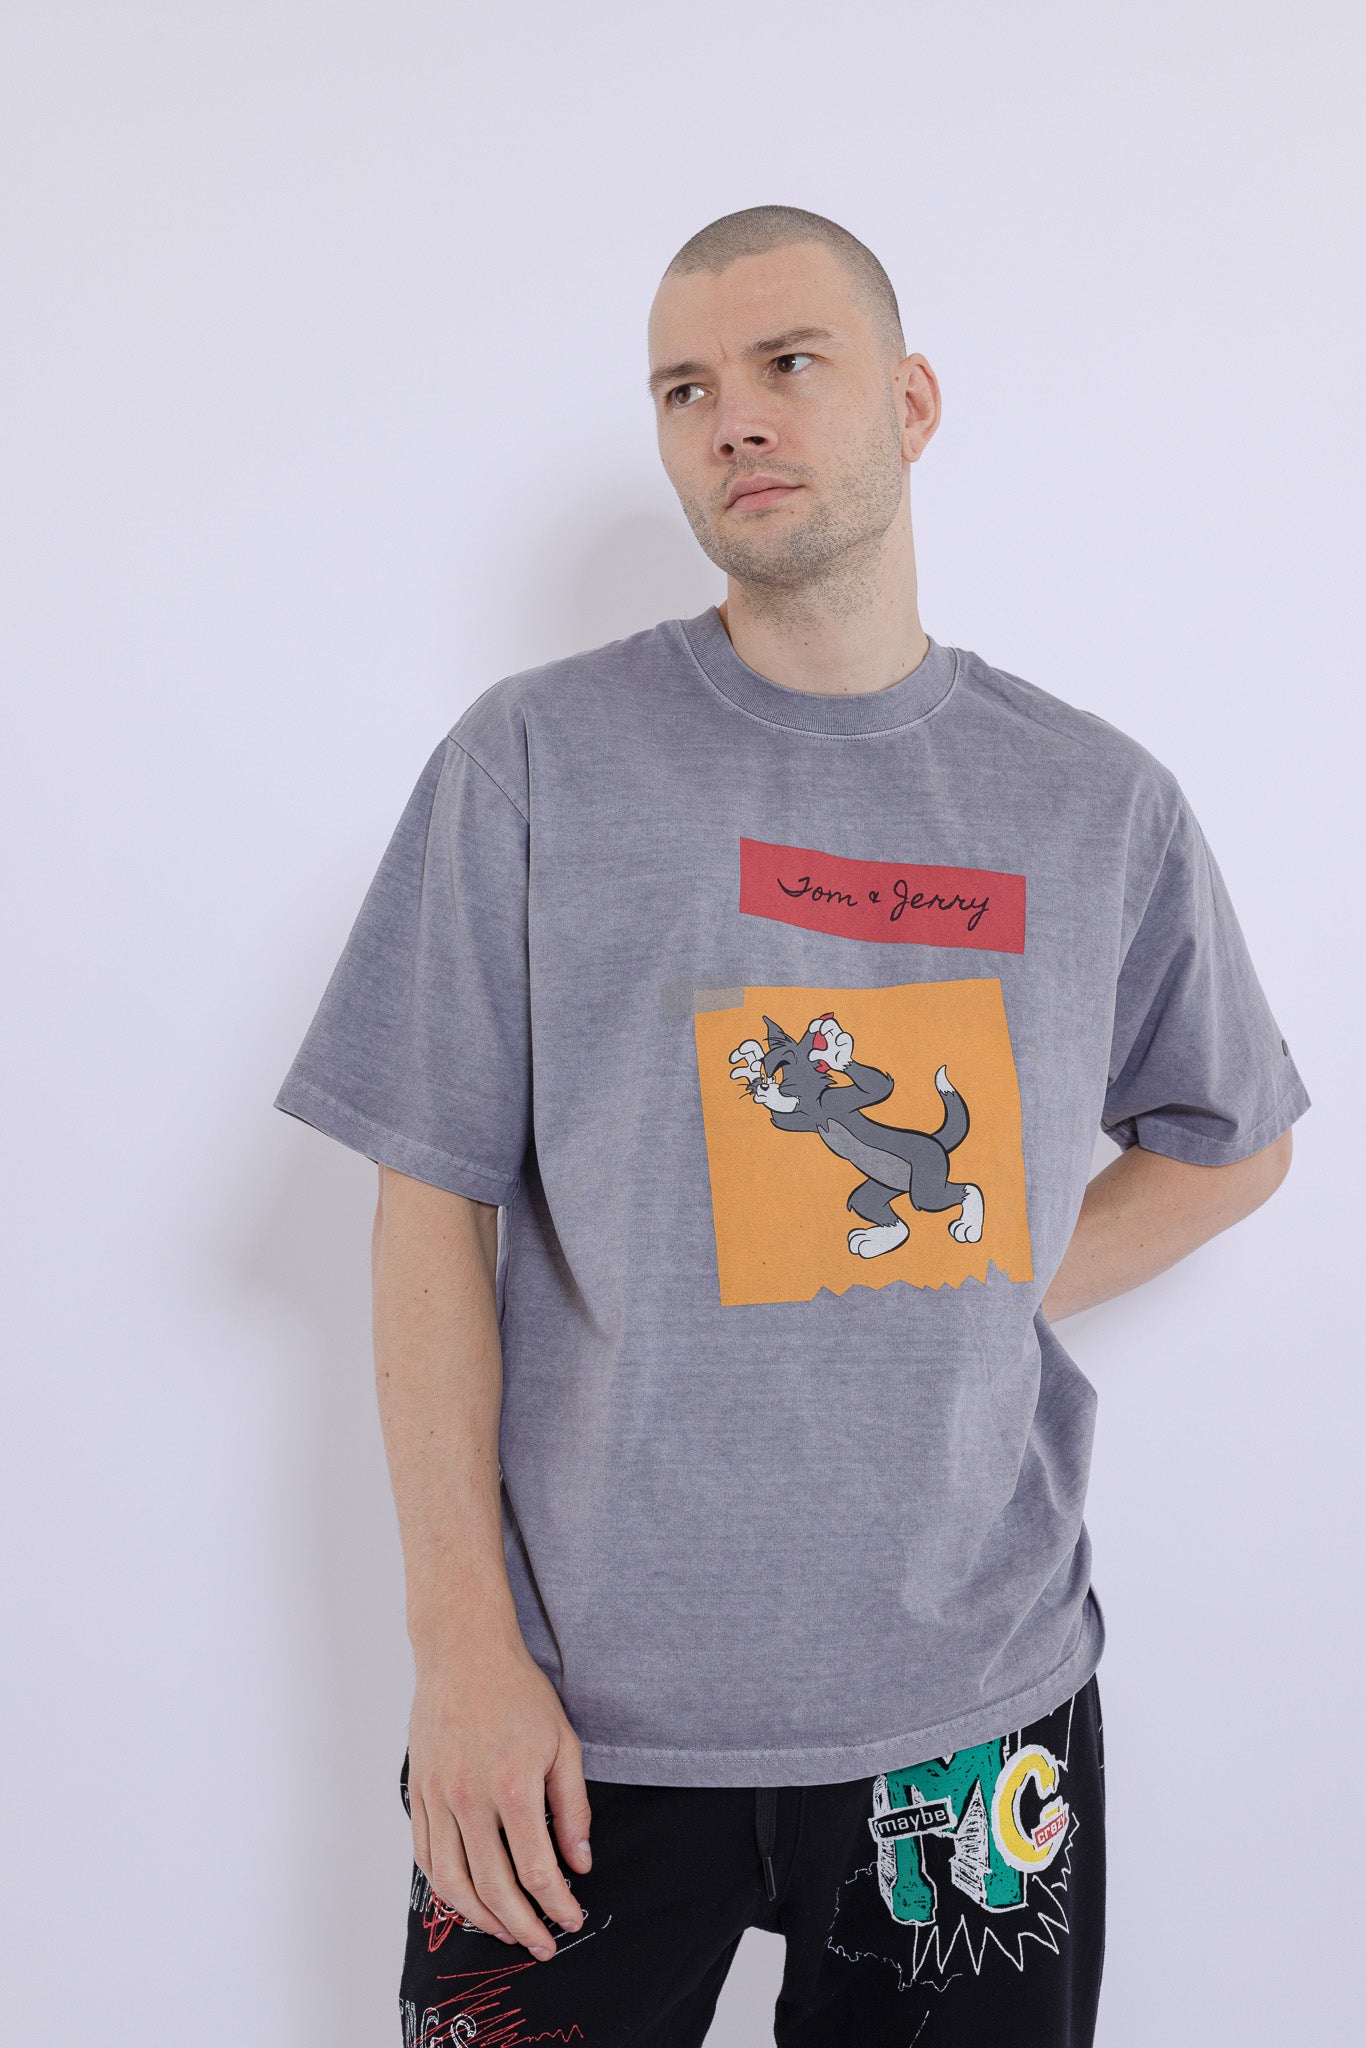 Postage Stamp Chasing Tom & Jerry T-Shirt